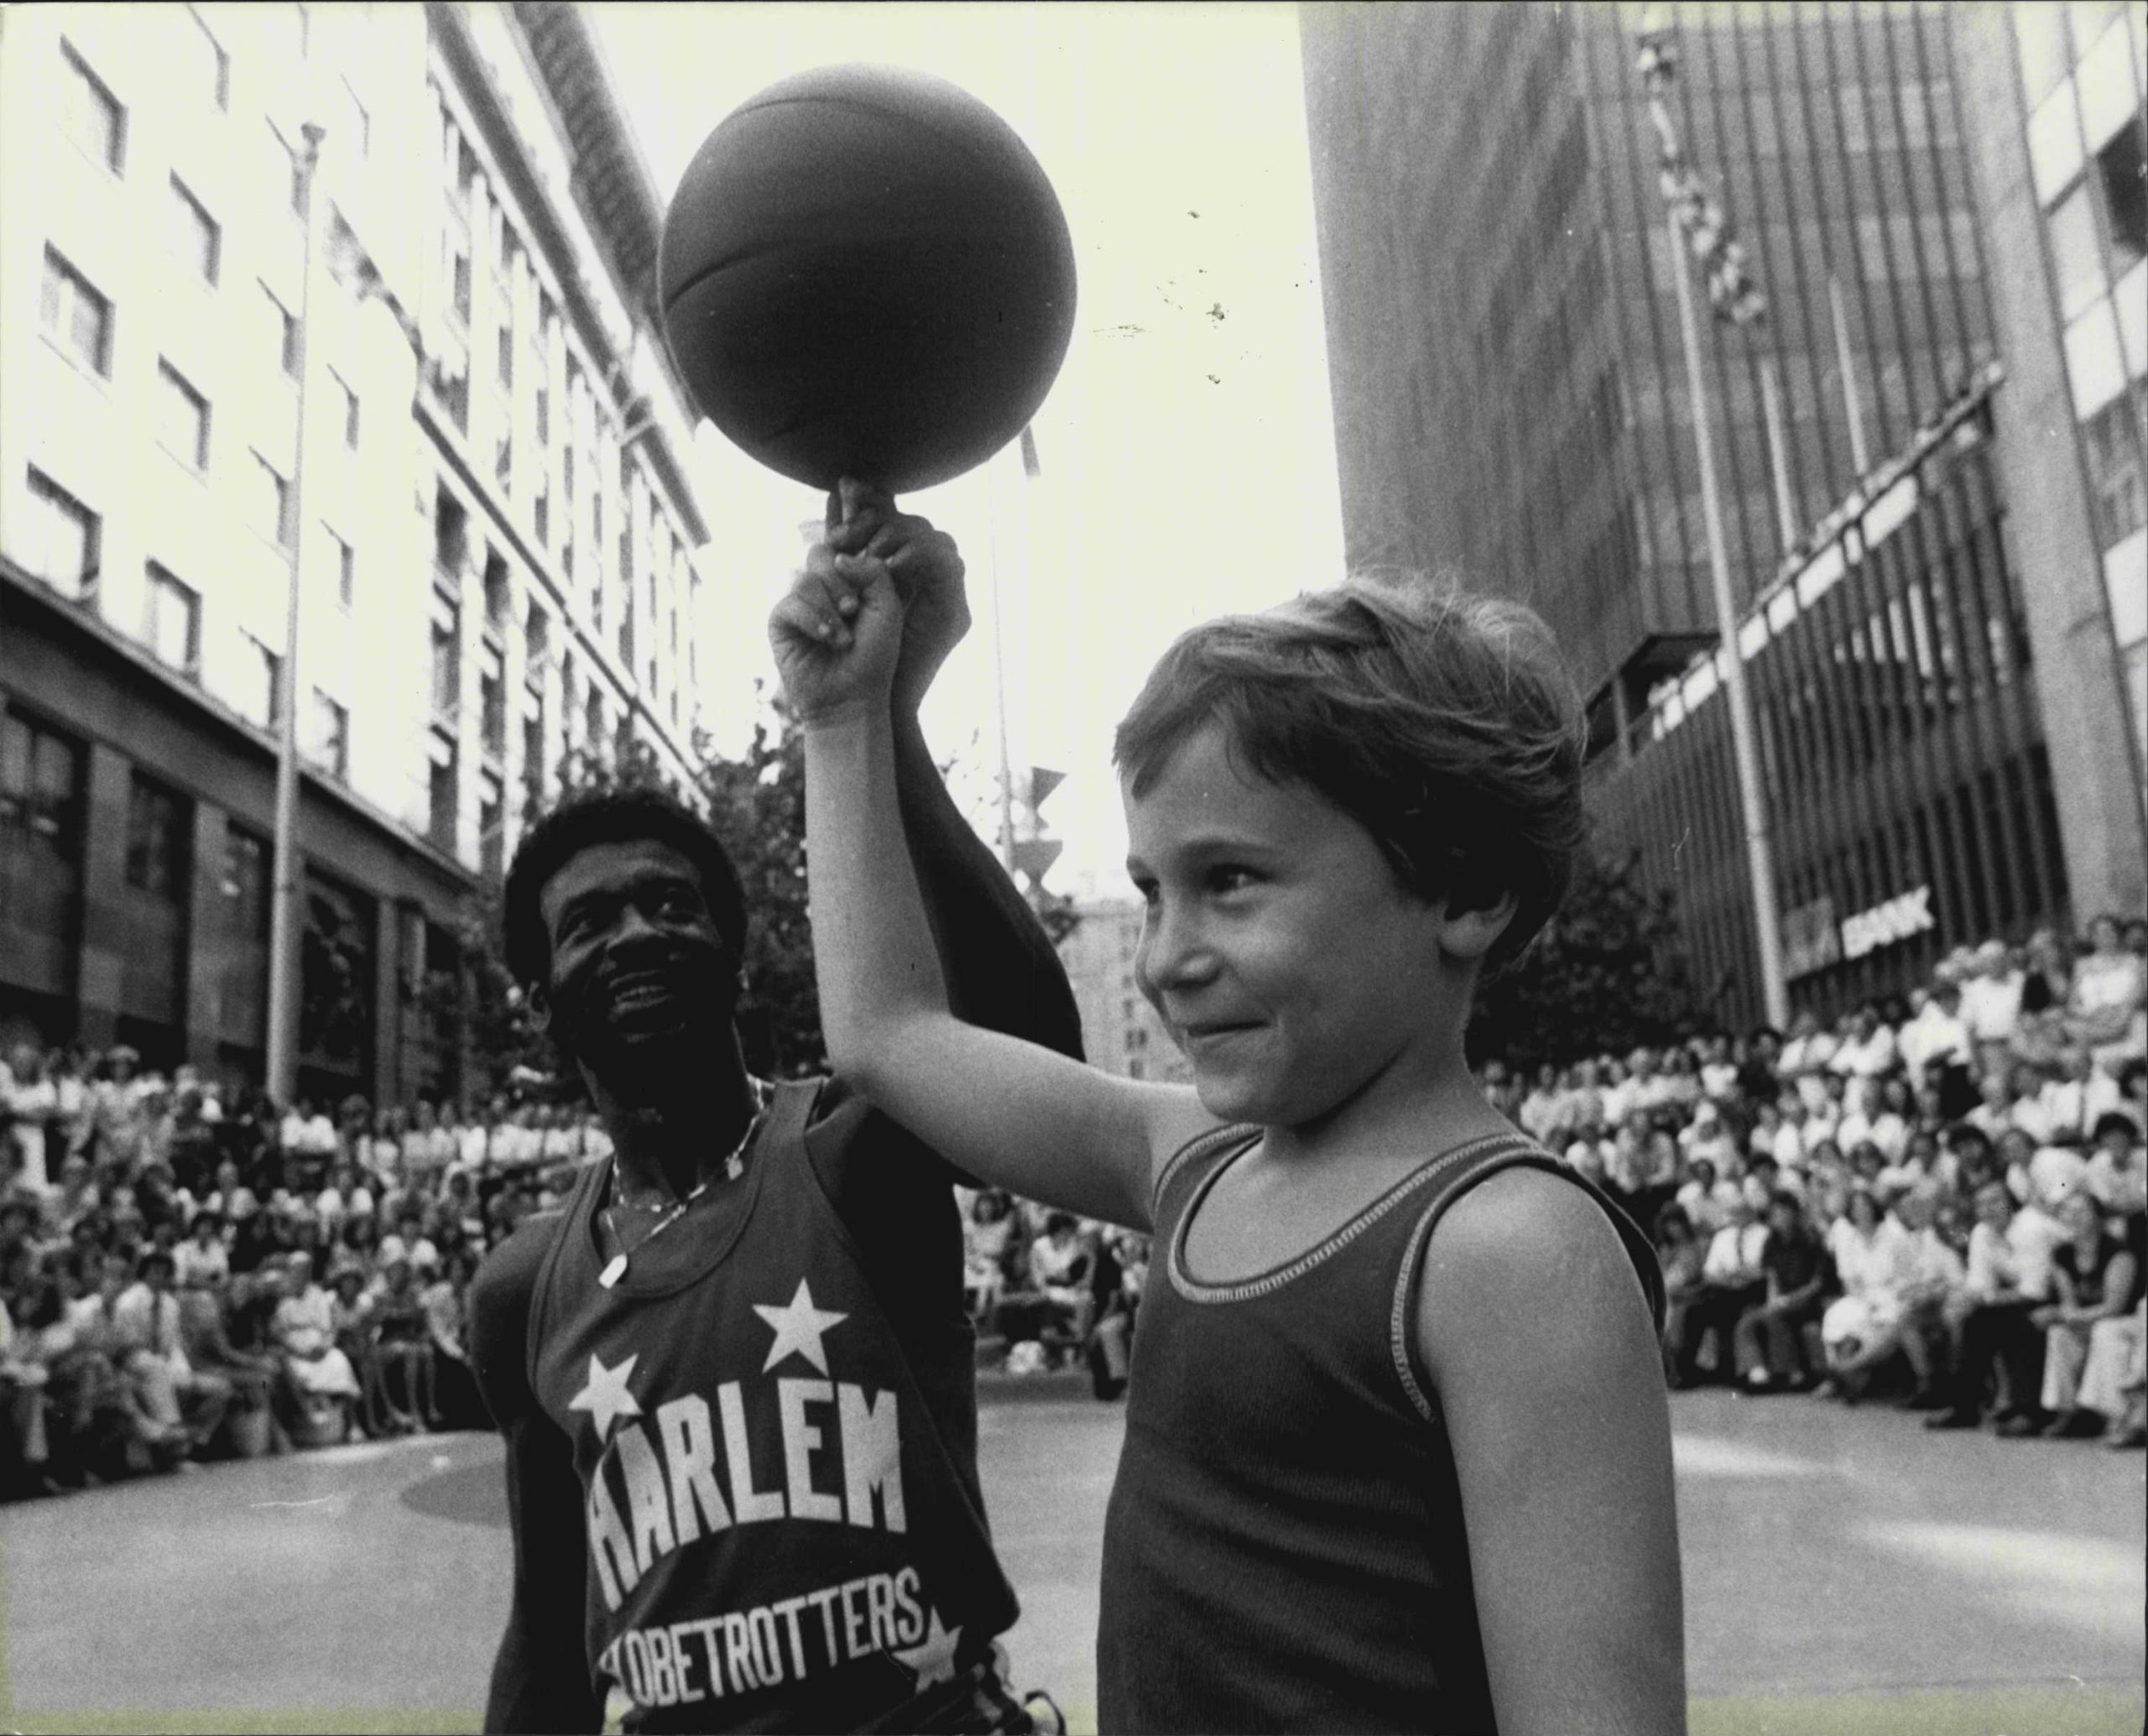 The Harlem Globetrotters at Martin Place Amphitheatre giving a lunch hour display of theur talents.  Julian Cappe, 7, of Bellevue Hill, practices with Larry Rivers one of the Globetrotters. March 3, 1980. (Photo by John Nobley/Fairfax Media).